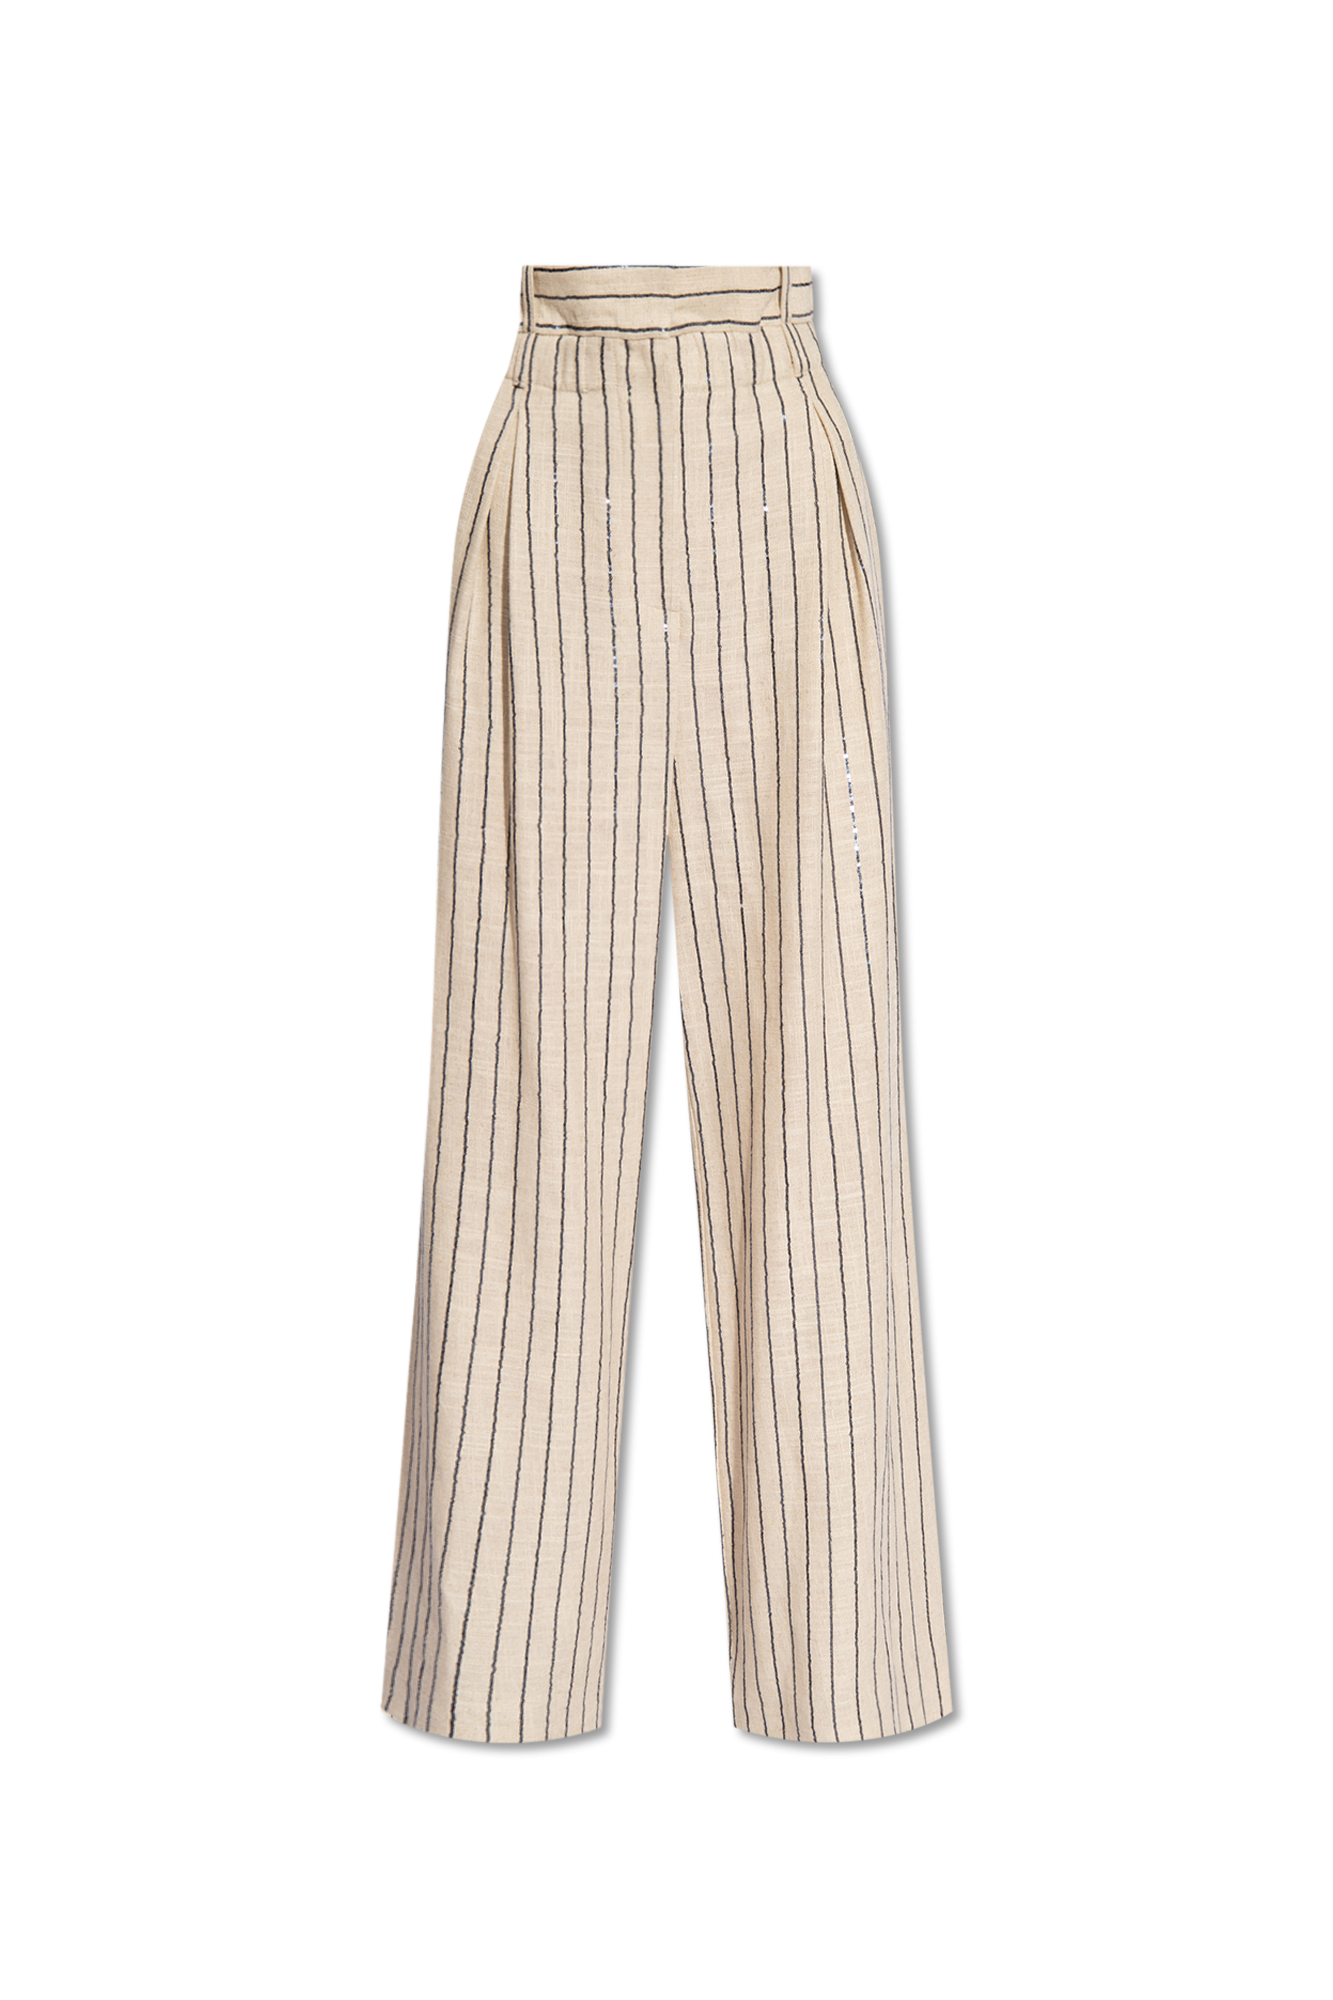 The Mannei ‘Ludvika’ trousers